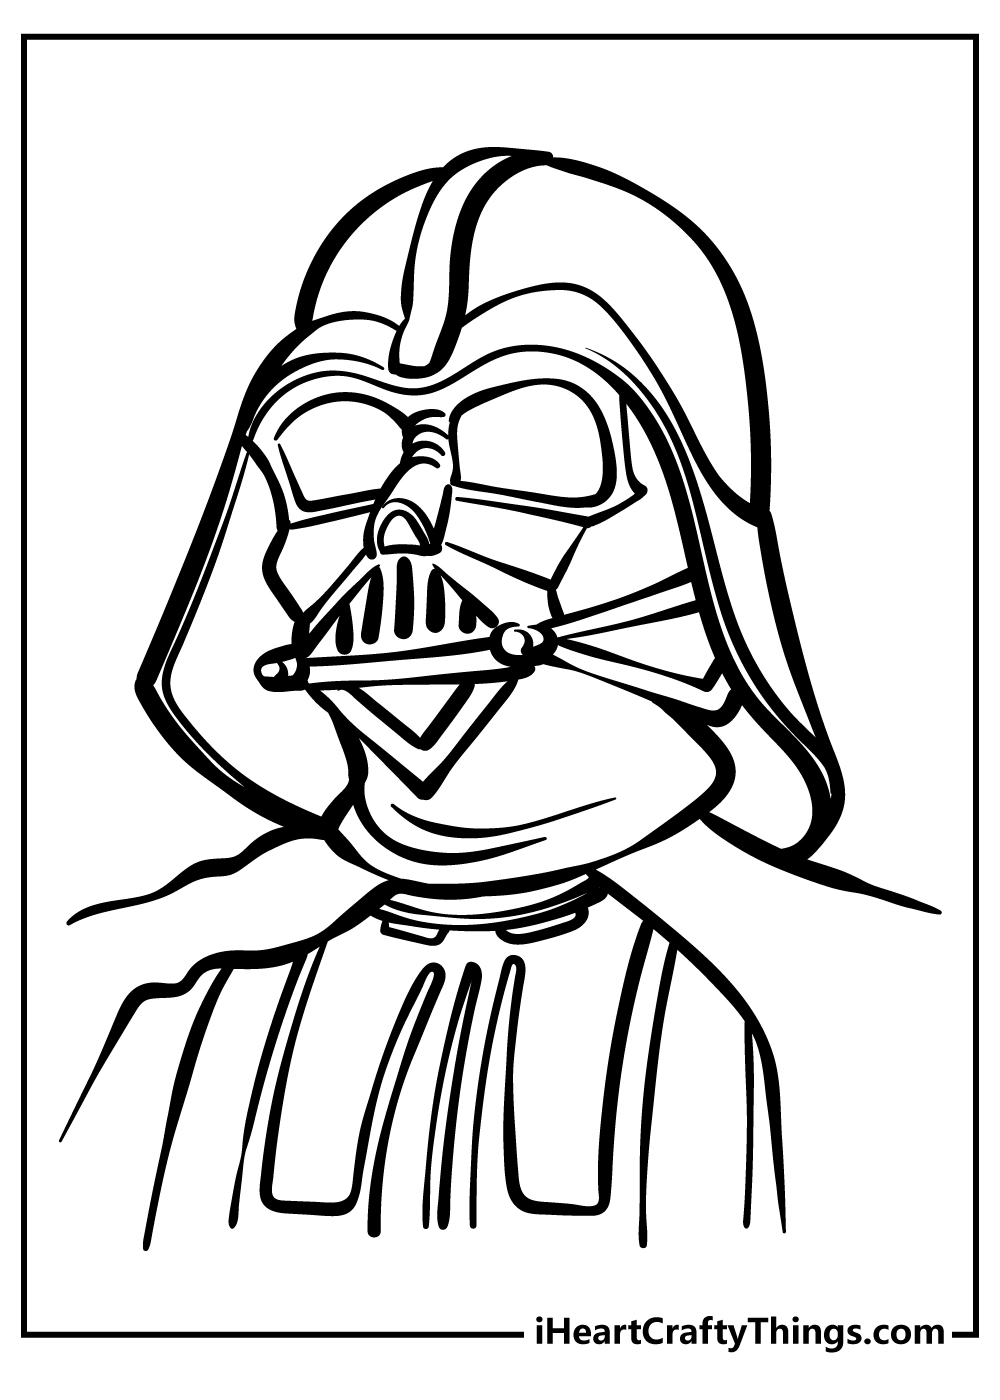 Printable Star Wars Coloring Pages Updated 20